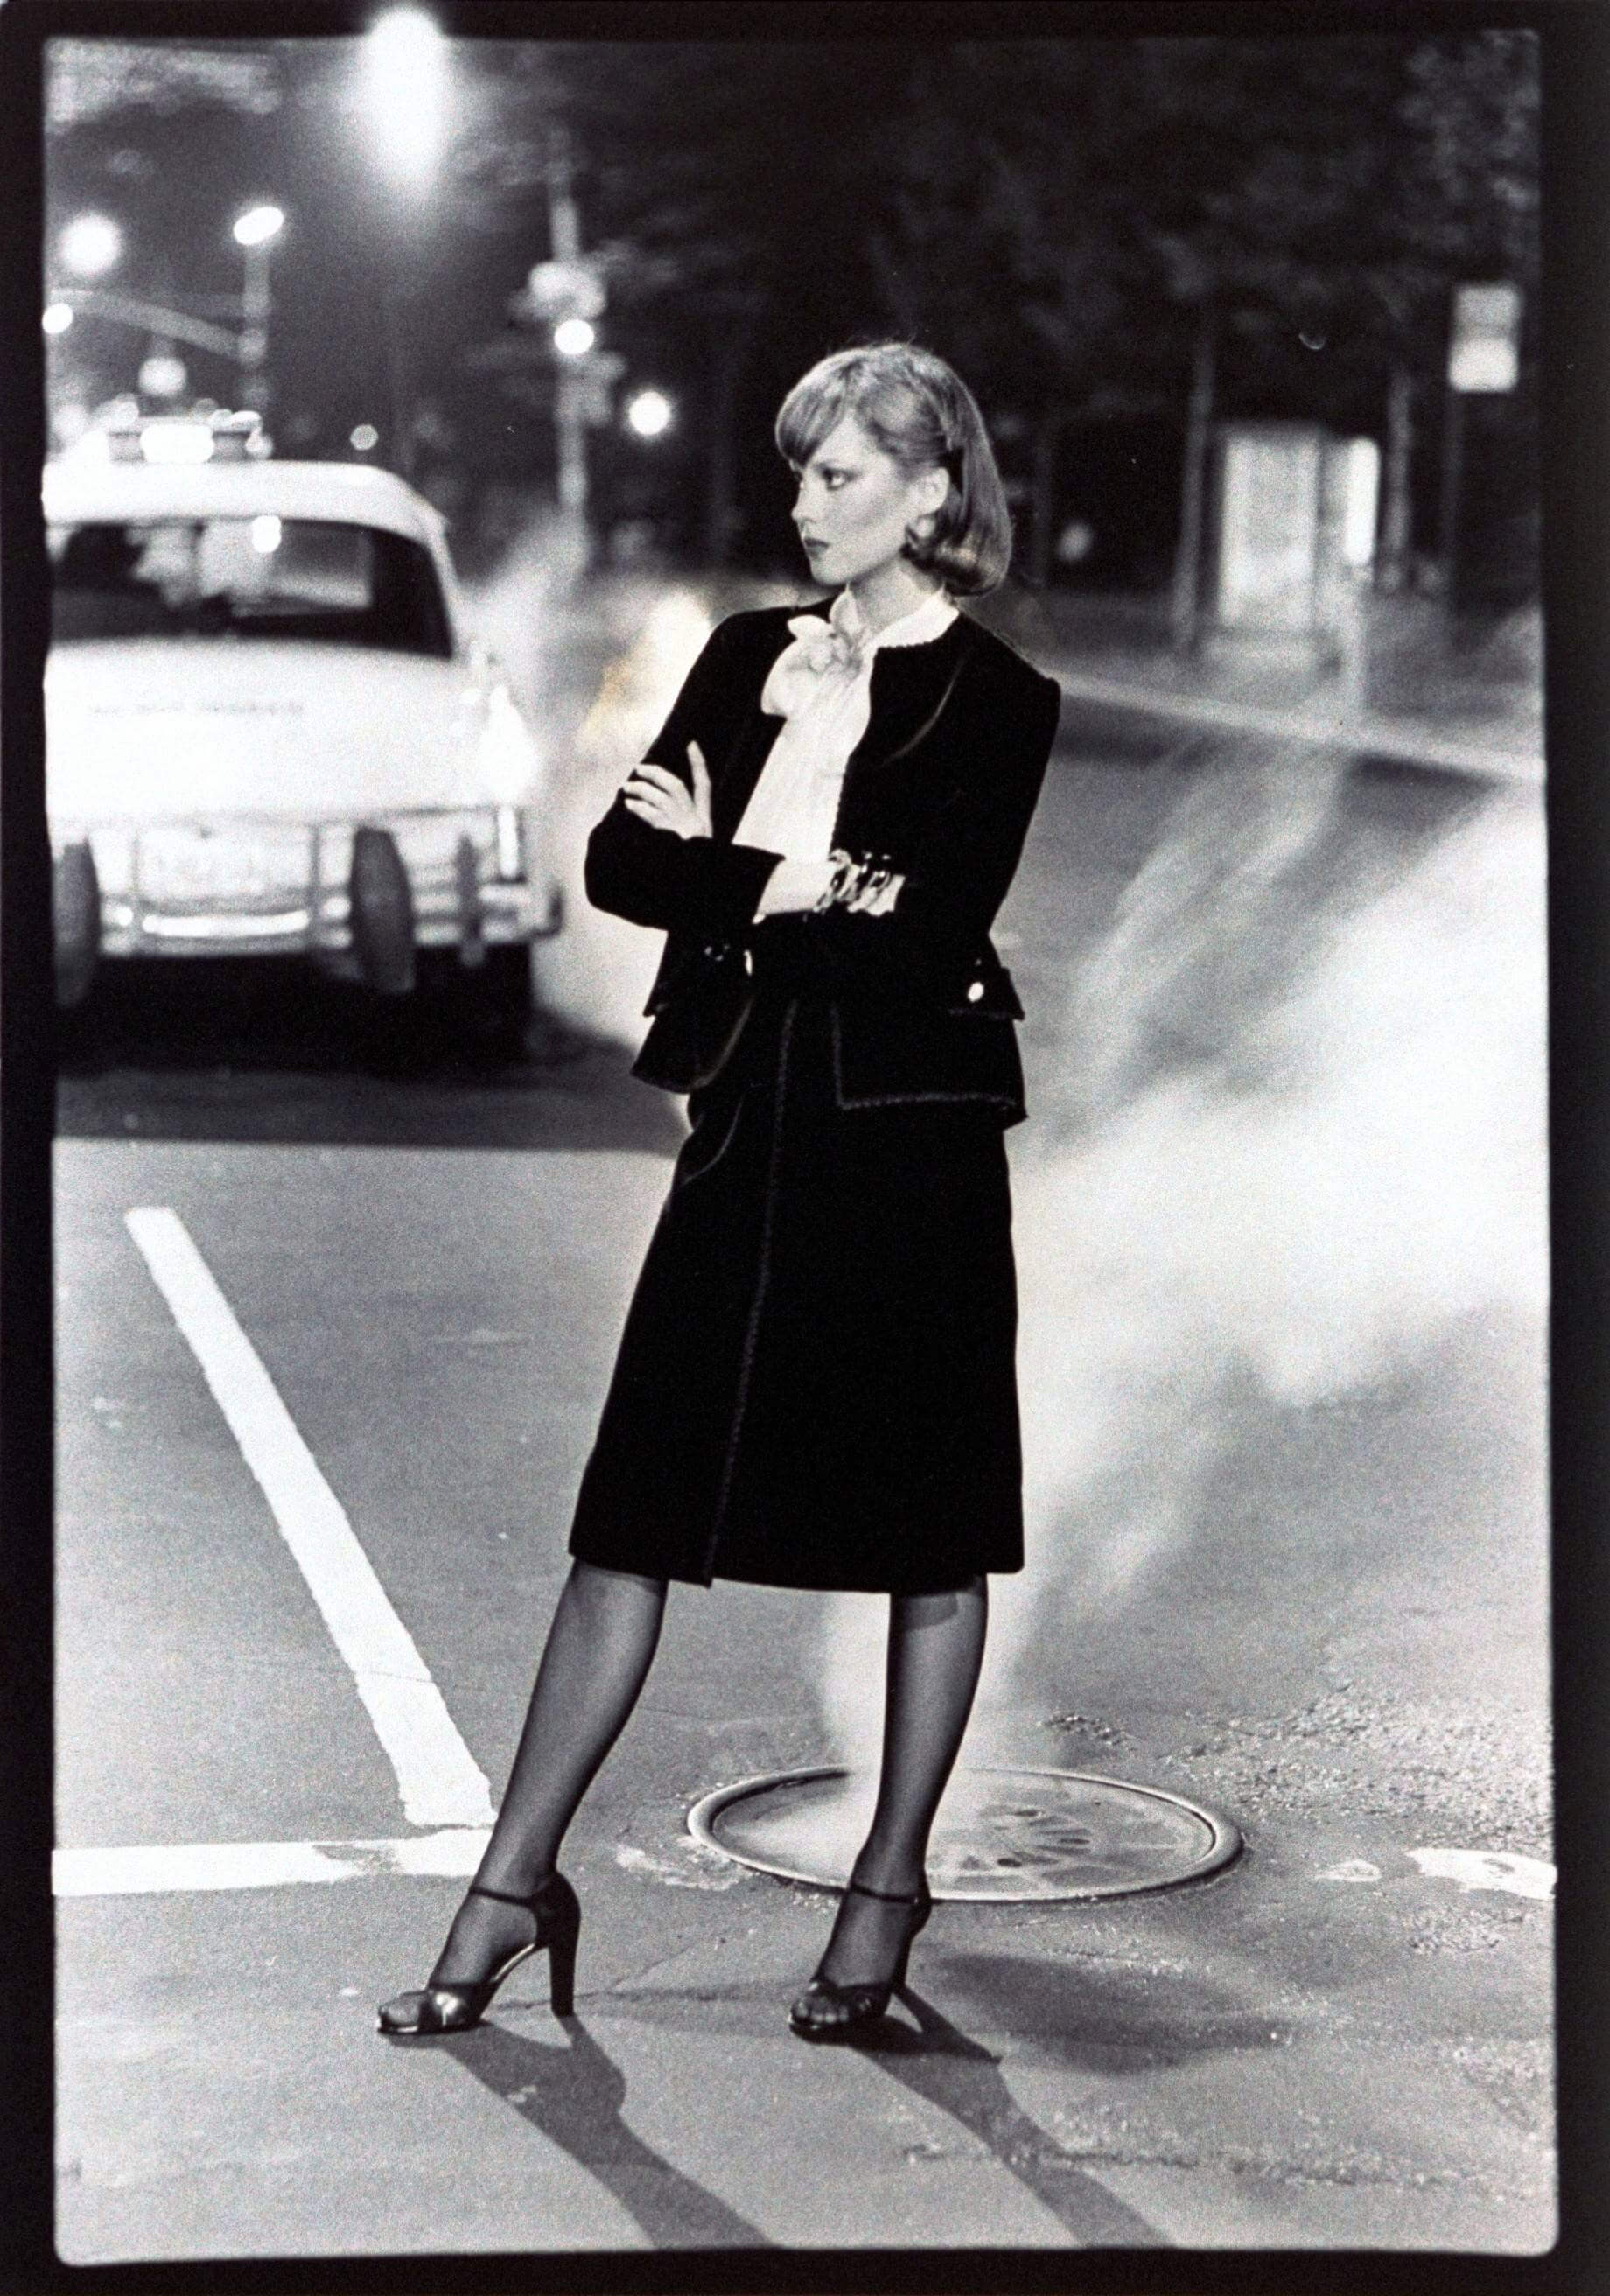 Model Rosie Vela standing with arms crossed in the street in New York City, near a steaming manhole Vogue cover, wearing a black velvet Chanel suit with wrap skirt and a small jacket over white satin blouse, by Belle Saunders for Abe Schrader, 1975. (Guliver Photos/ Getty Images).